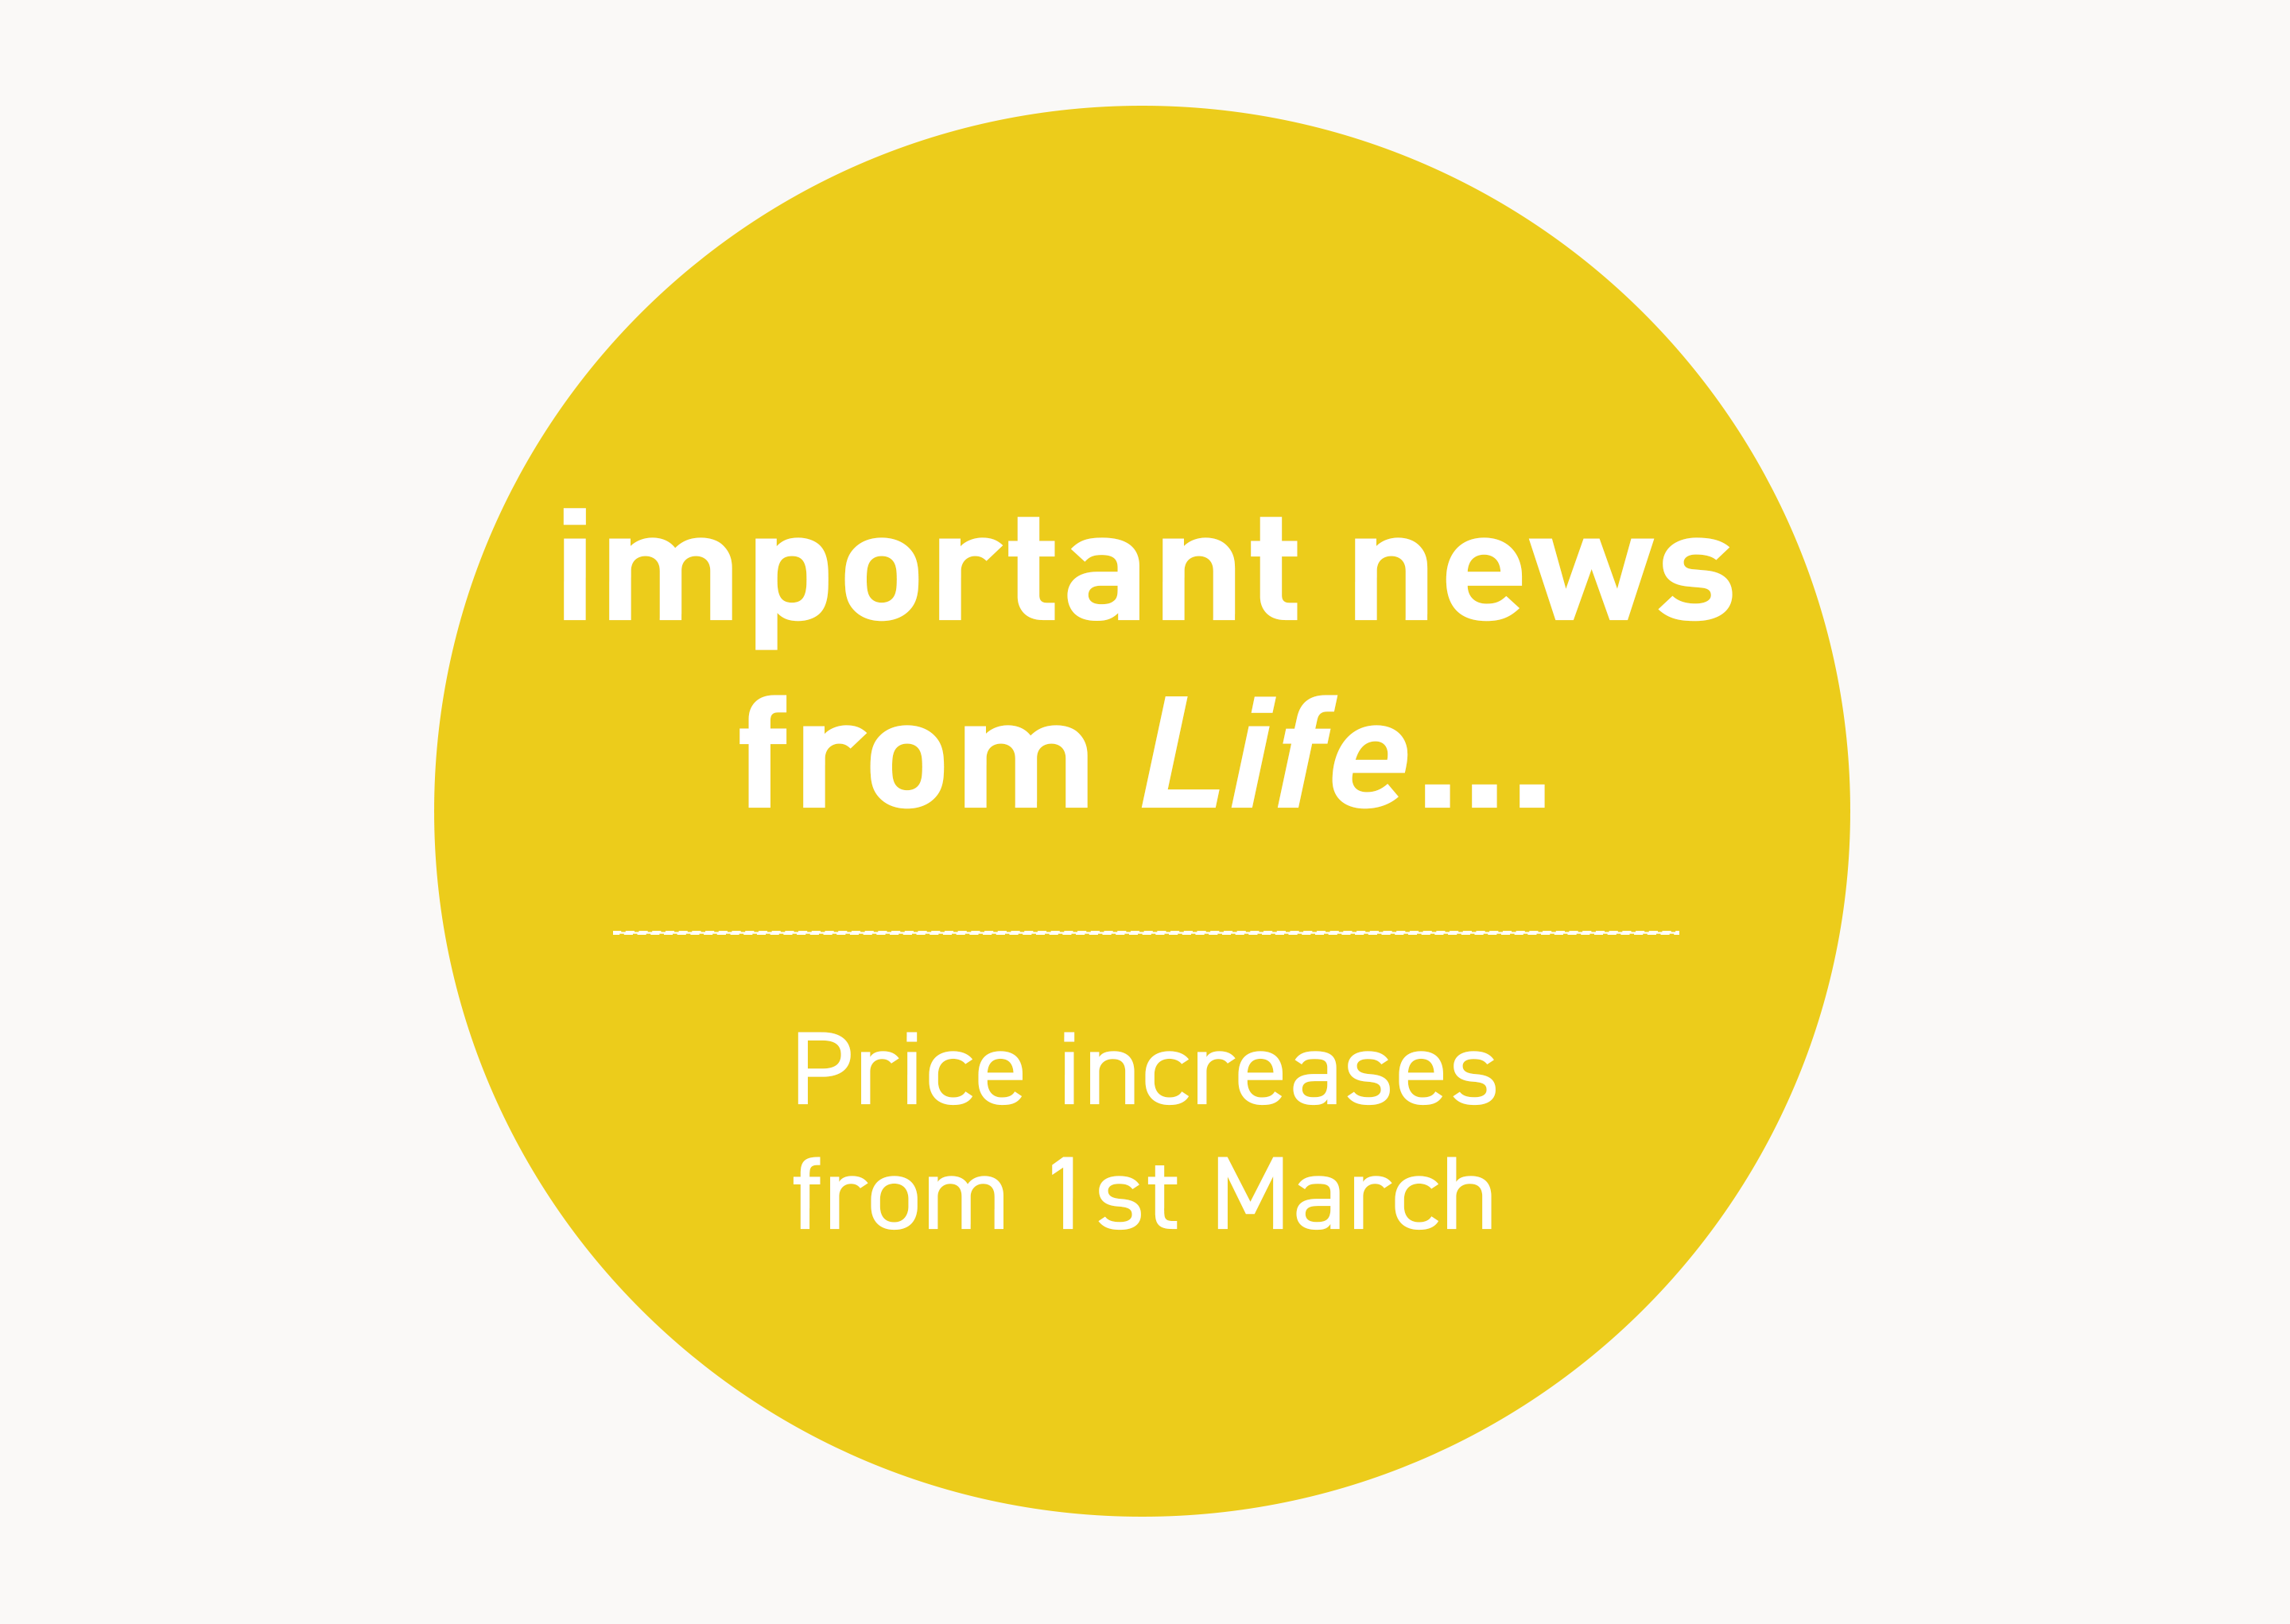 Price increases on Life Interiors products starting from the 1st of March.